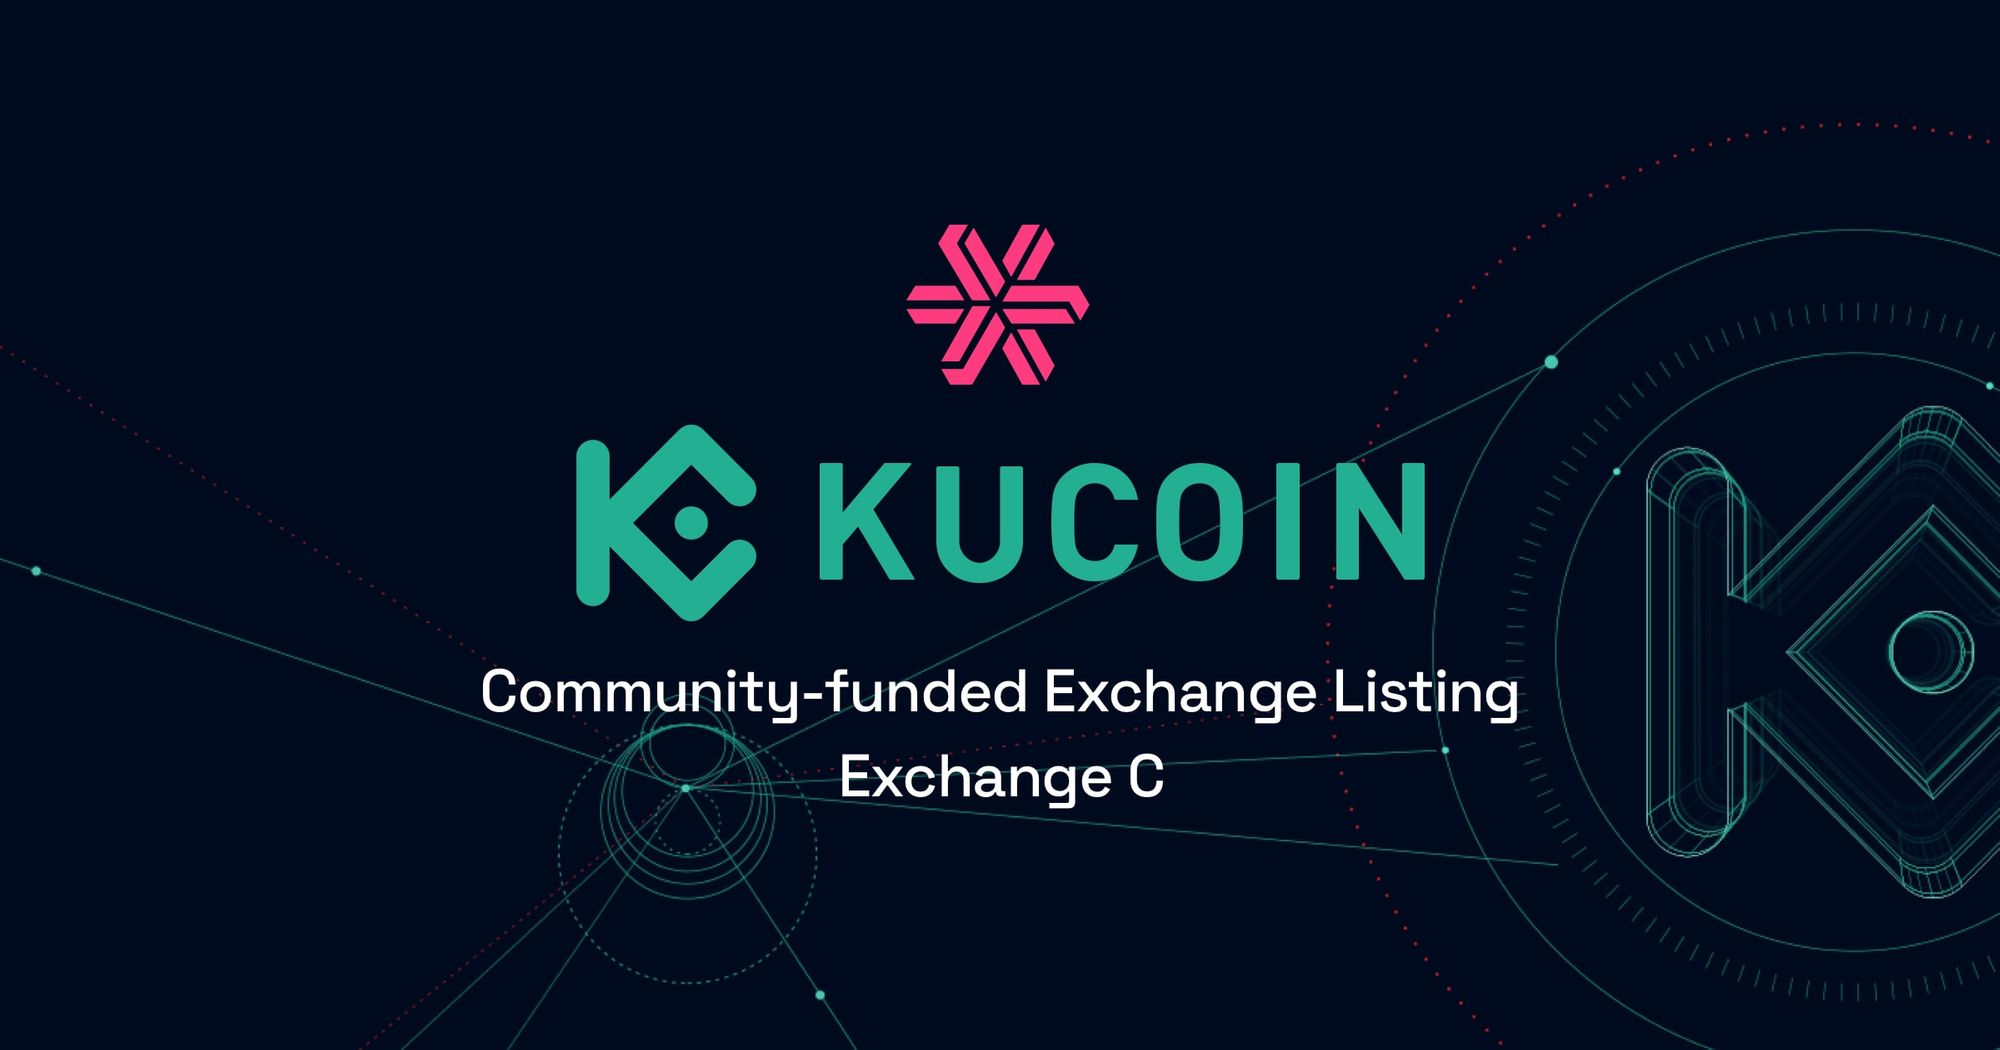 Edgeware pioneers DAO listings on Kucoin Exchange, opening first trading pair.